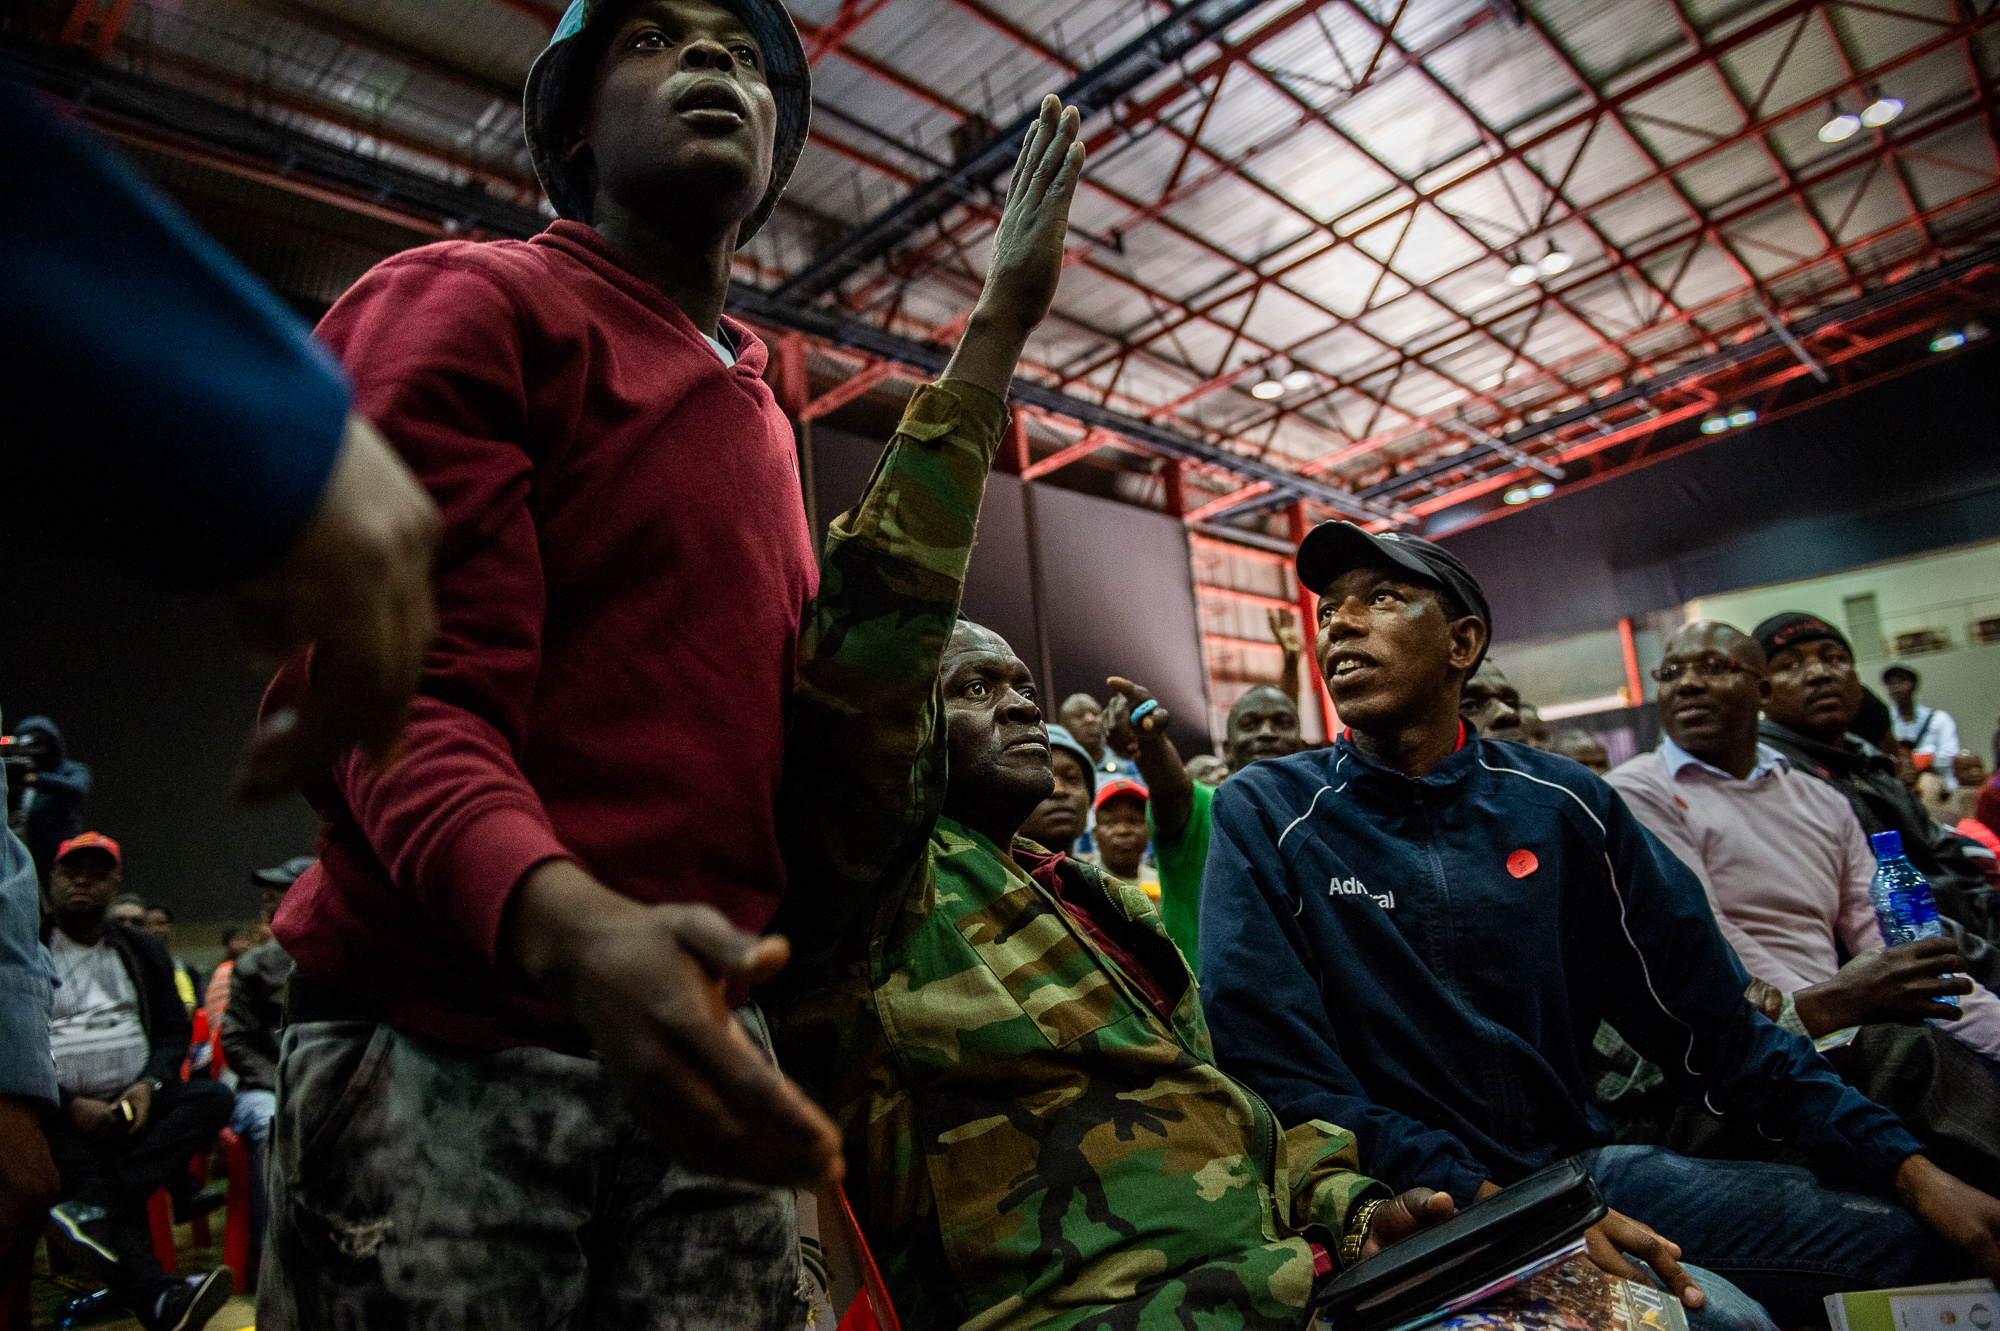  South Africa, Pretoria, 28.07.2018 // The land debate is often highly emotional. During a public hearing in the Heartfelt Arena in Pretoria, people of the audience get upset about one of the presented opinions. // Lucas Bäuml 